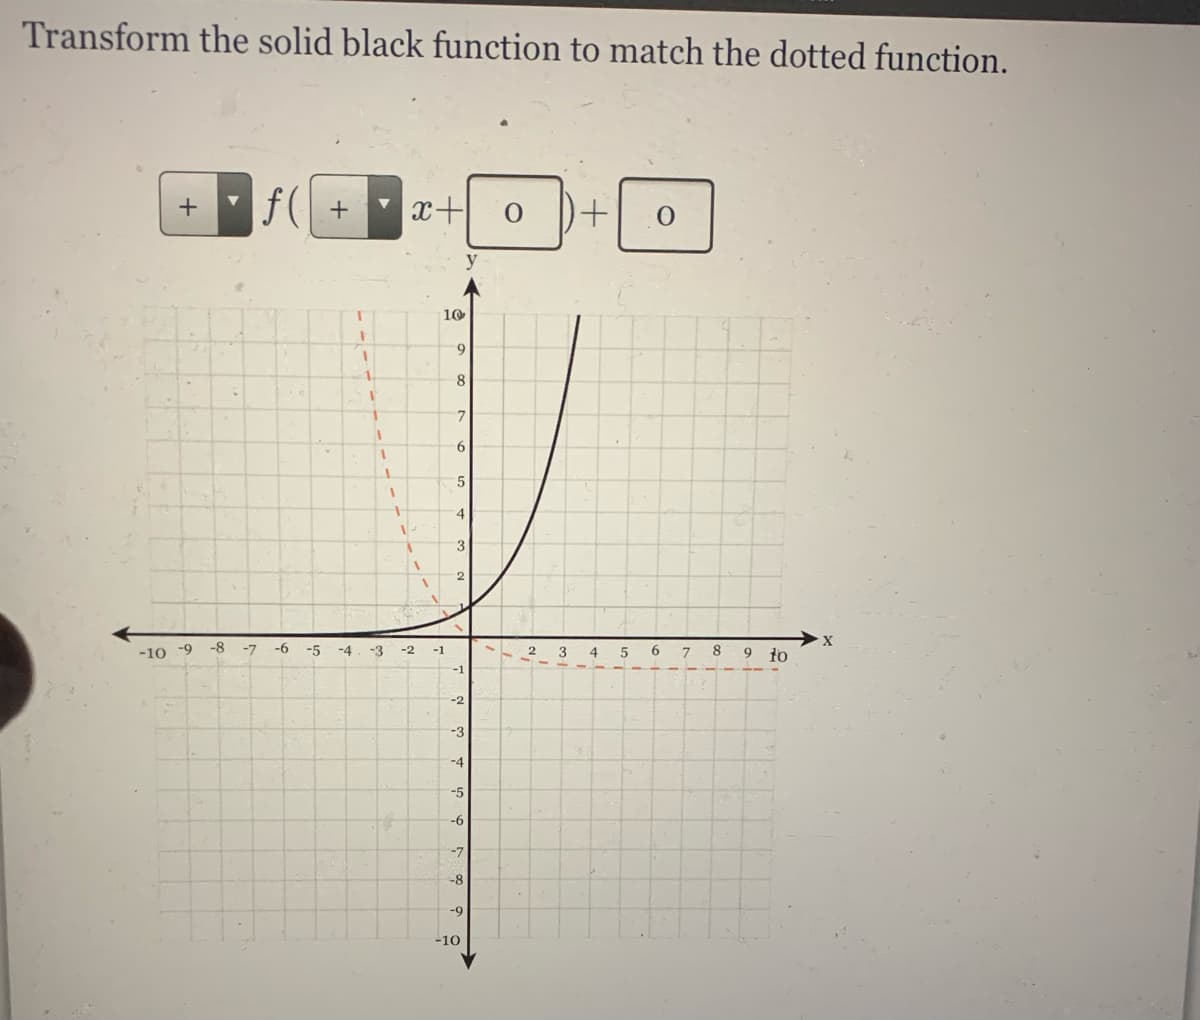 Transform the solid black function to match the dotted function.
f( +
x+
10
9.
8.
7
6.
-10 -9
-8
-7
-6
-5
-4
-3
-2
-1
2
4
6.
8
9
to
-1
-2
-3
-4
-5
-6
-7
-8
-9
-10
